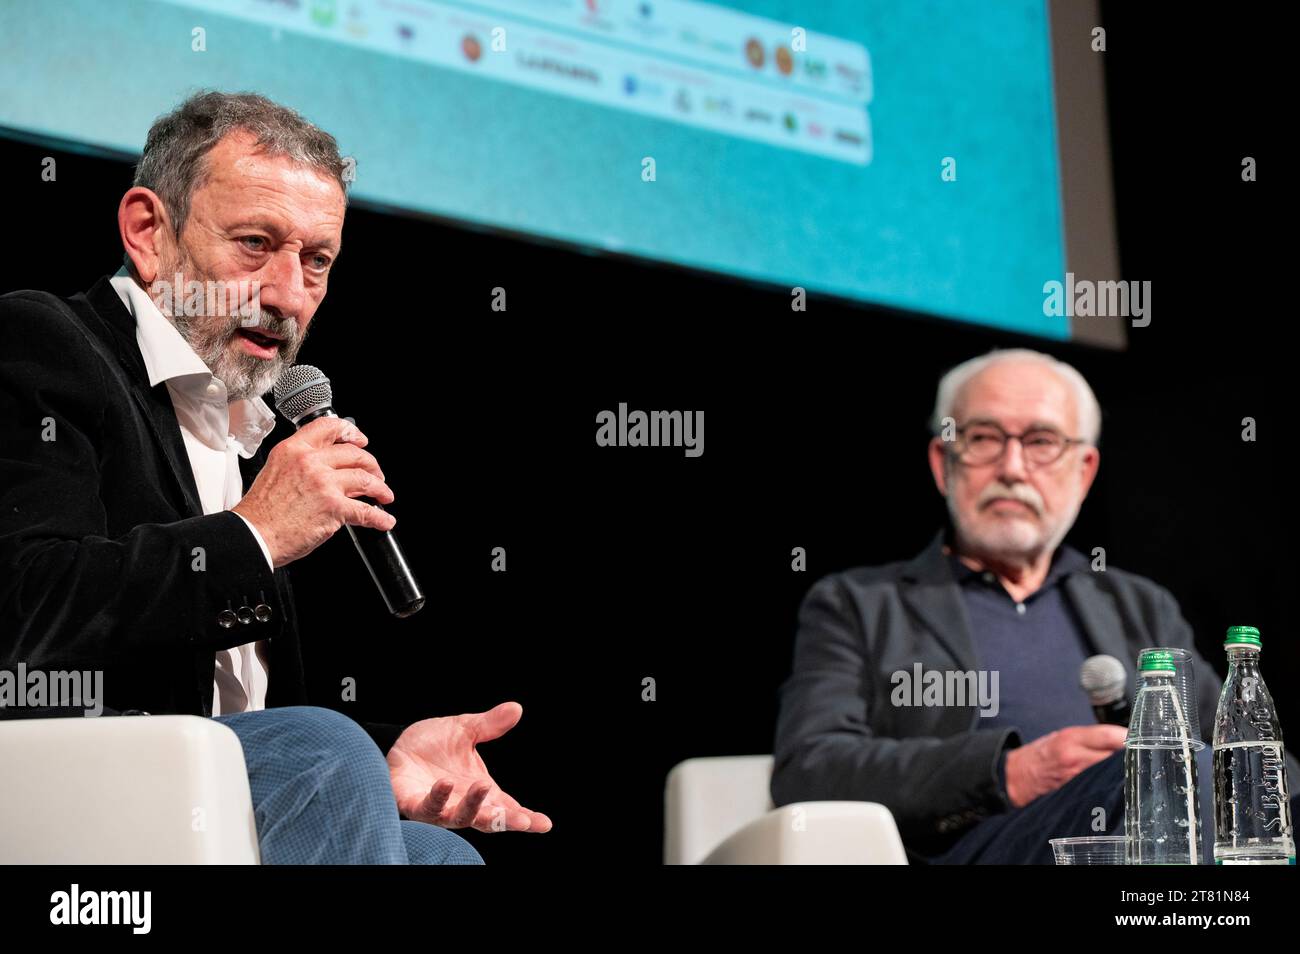 Cuneo, Italy. November 17, 2023. The journalist and writer Michele Serra together with the satirical designer and cartoonist Altan at the presentation of their recently published book at the Scrittorincittà National Literary Festival. Credit: Luca Prestia / Alamy Live News Stock Photo